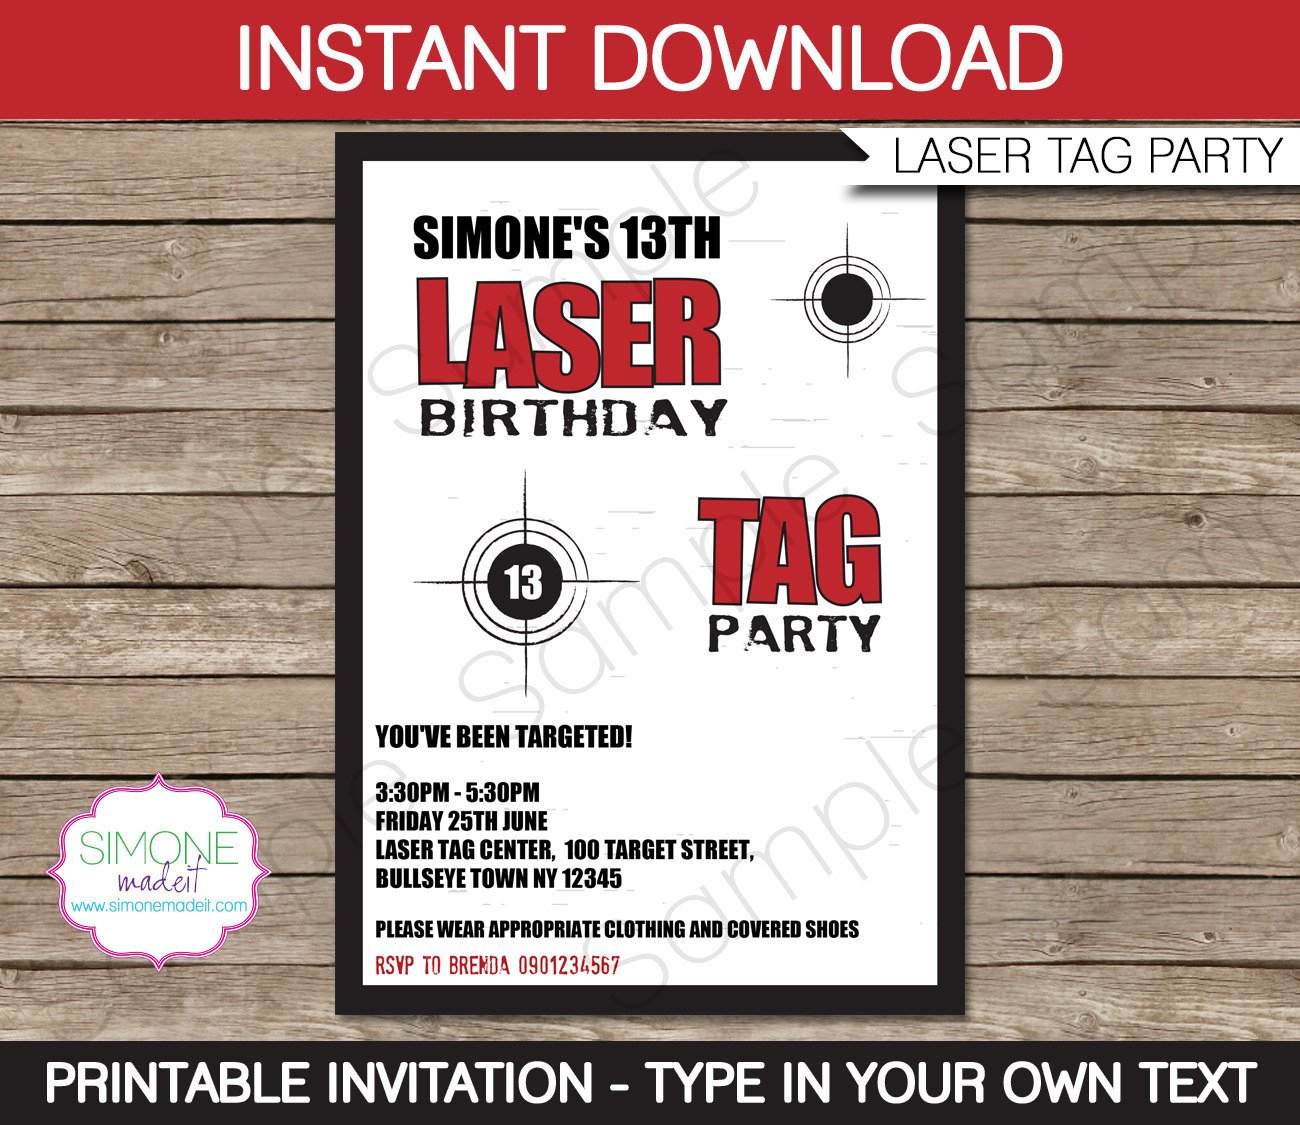 Laser Tag Invitation Template Birthday Party Instant | Etsy - Free Printable Laser Tag Invitation Template